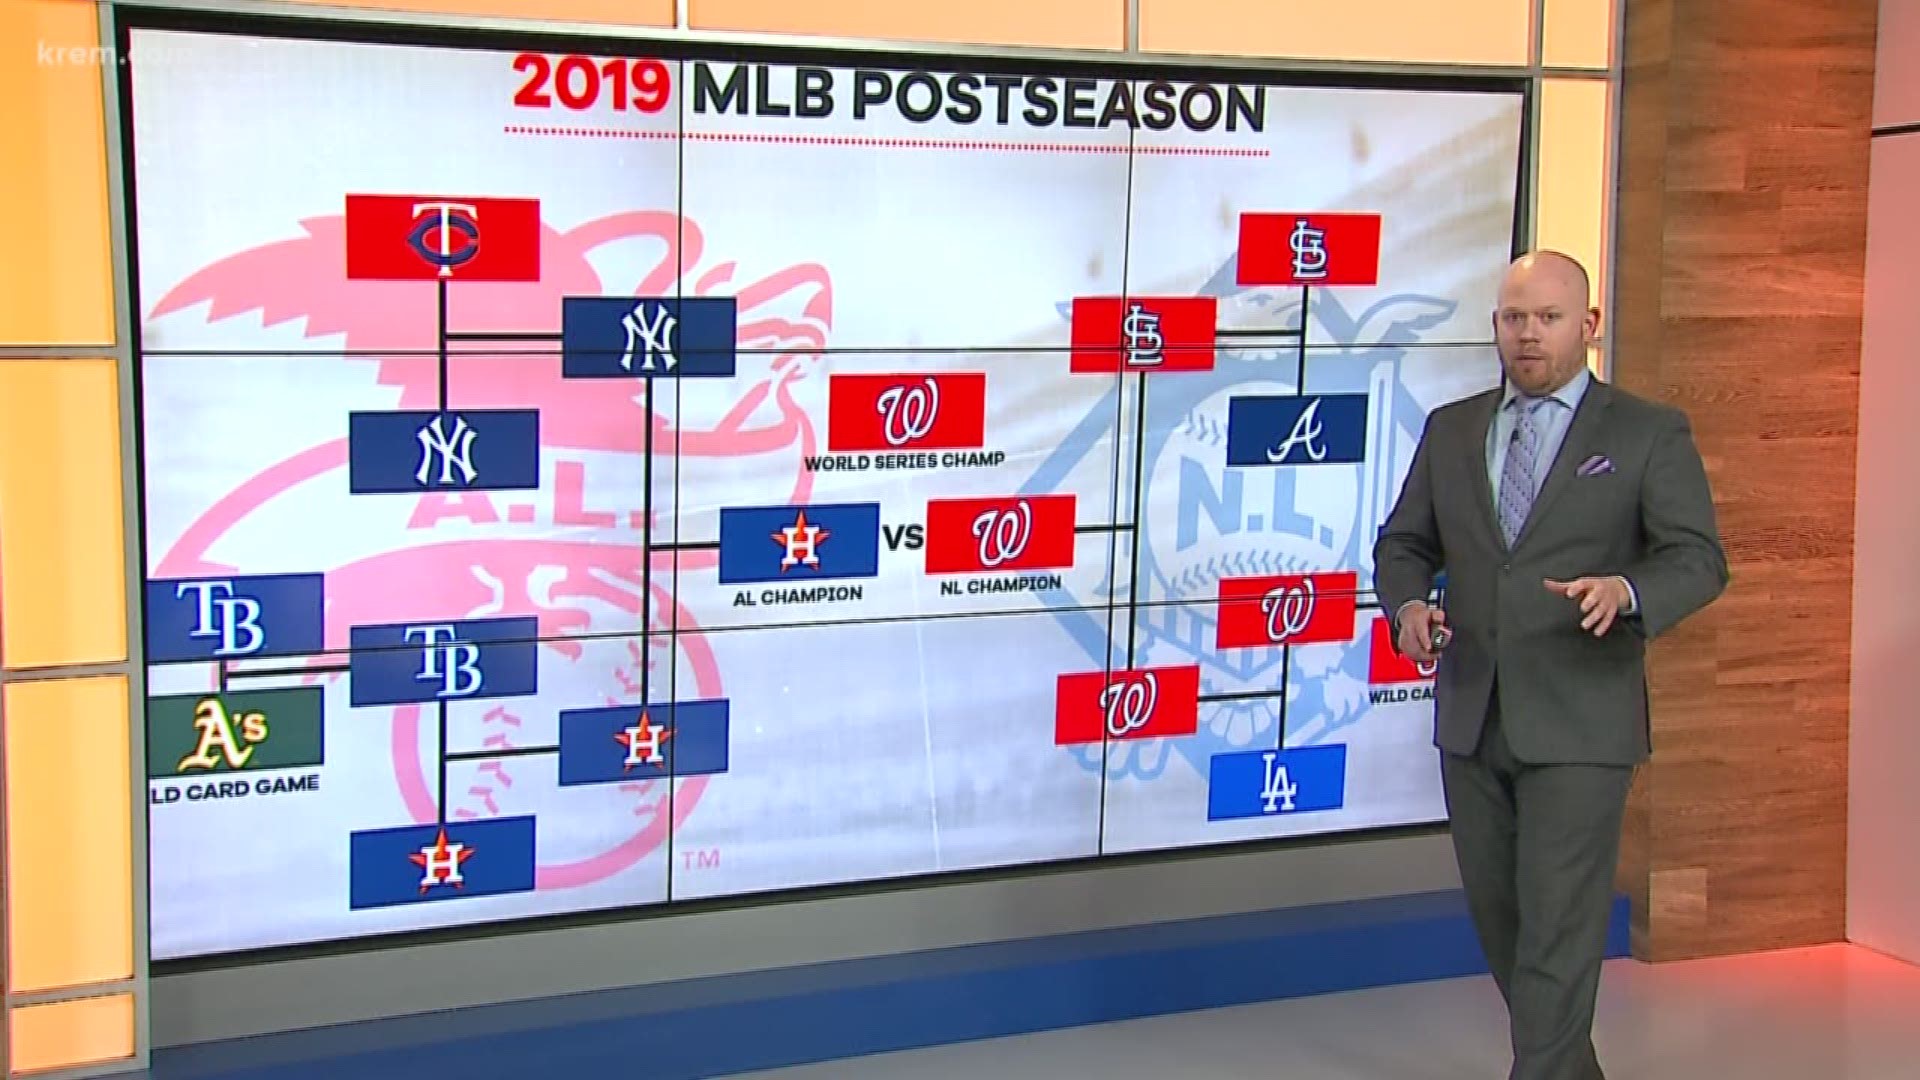 KREM's Joshua Robinson gives us his take on how proposed changes to the MLB playoff schedule could affect the future of baseball.